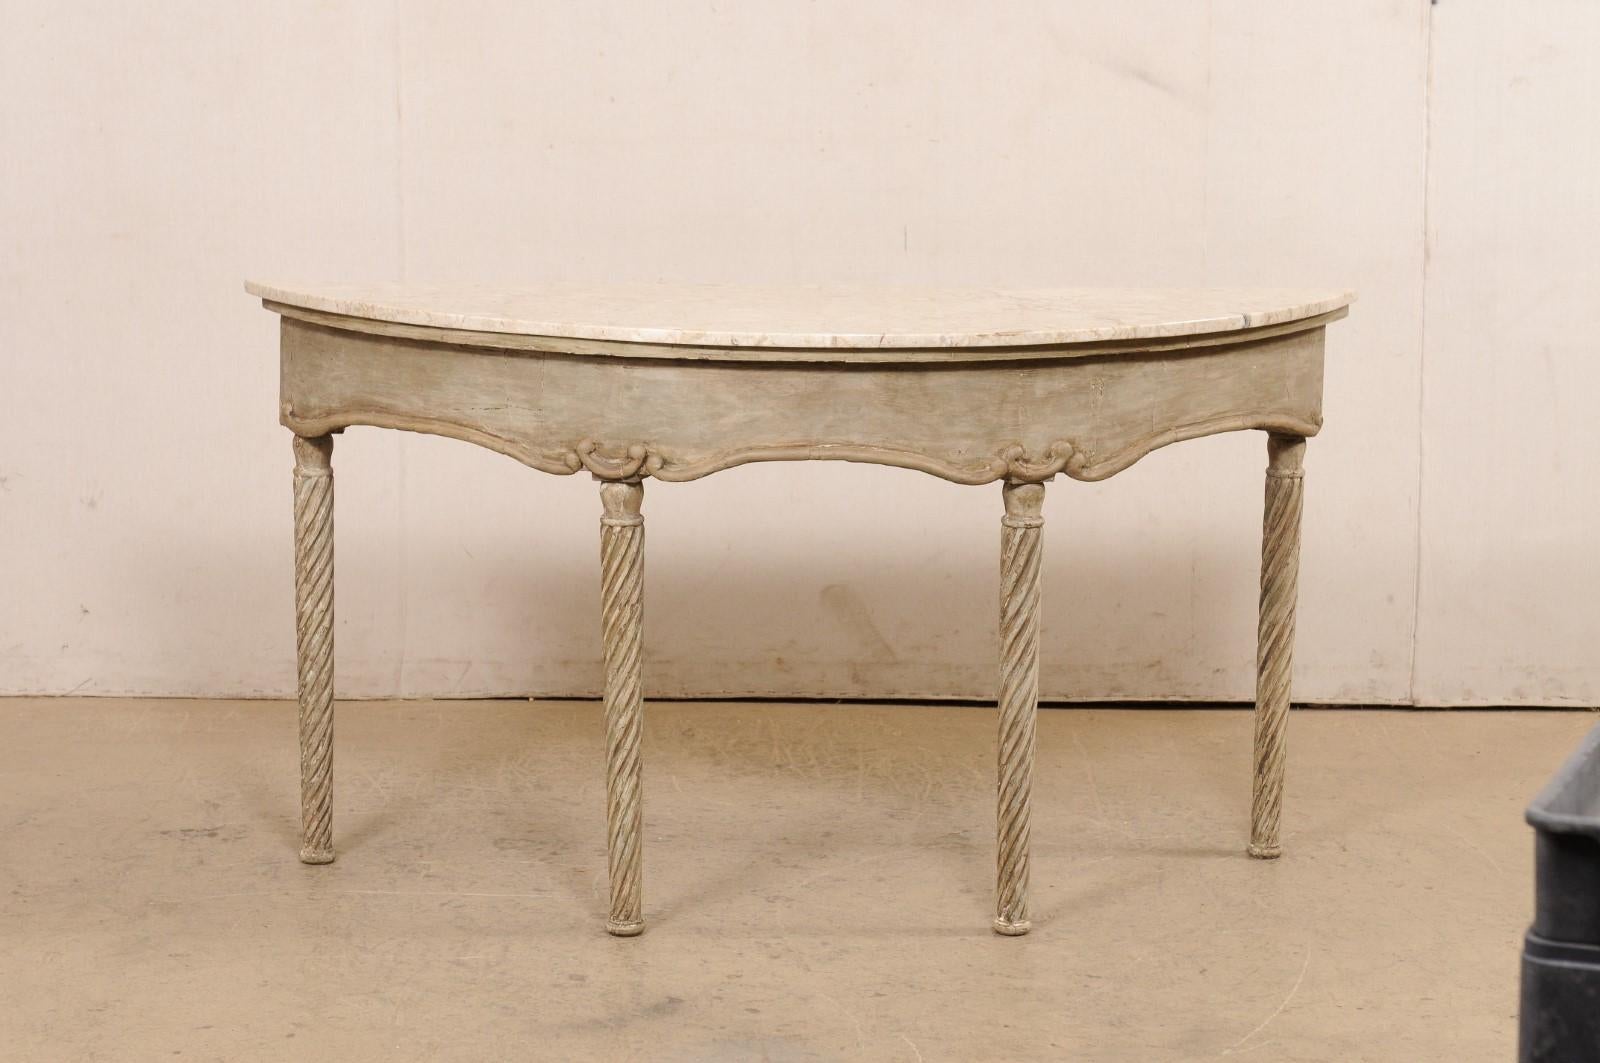 A French carved wood and marble top console table from the 18th century. This antique table from France has a lovely oblong demi shape to it; with marble top that rests upon an apron with a softly swagged skirt, and presented upon four rounded legs